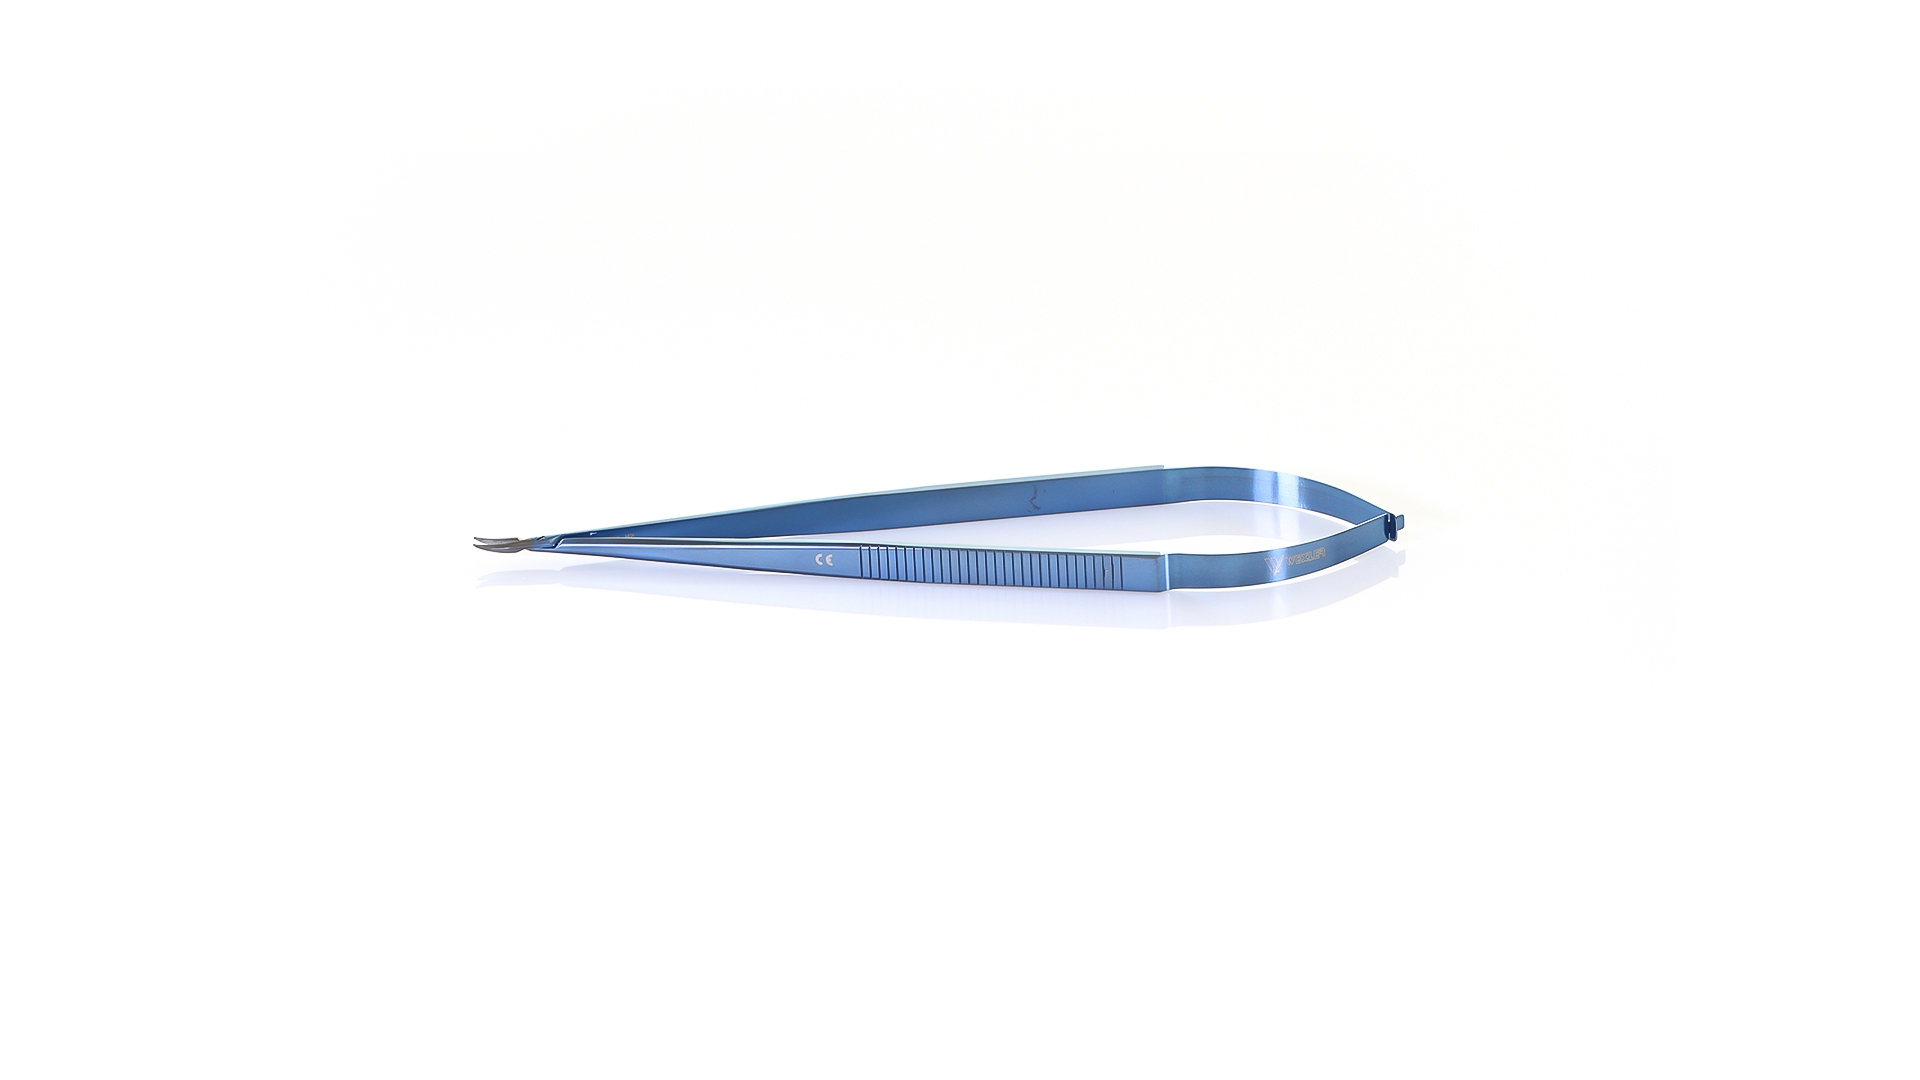 Castroviejo Delicate Needle Holder - Curved TC coated jaws